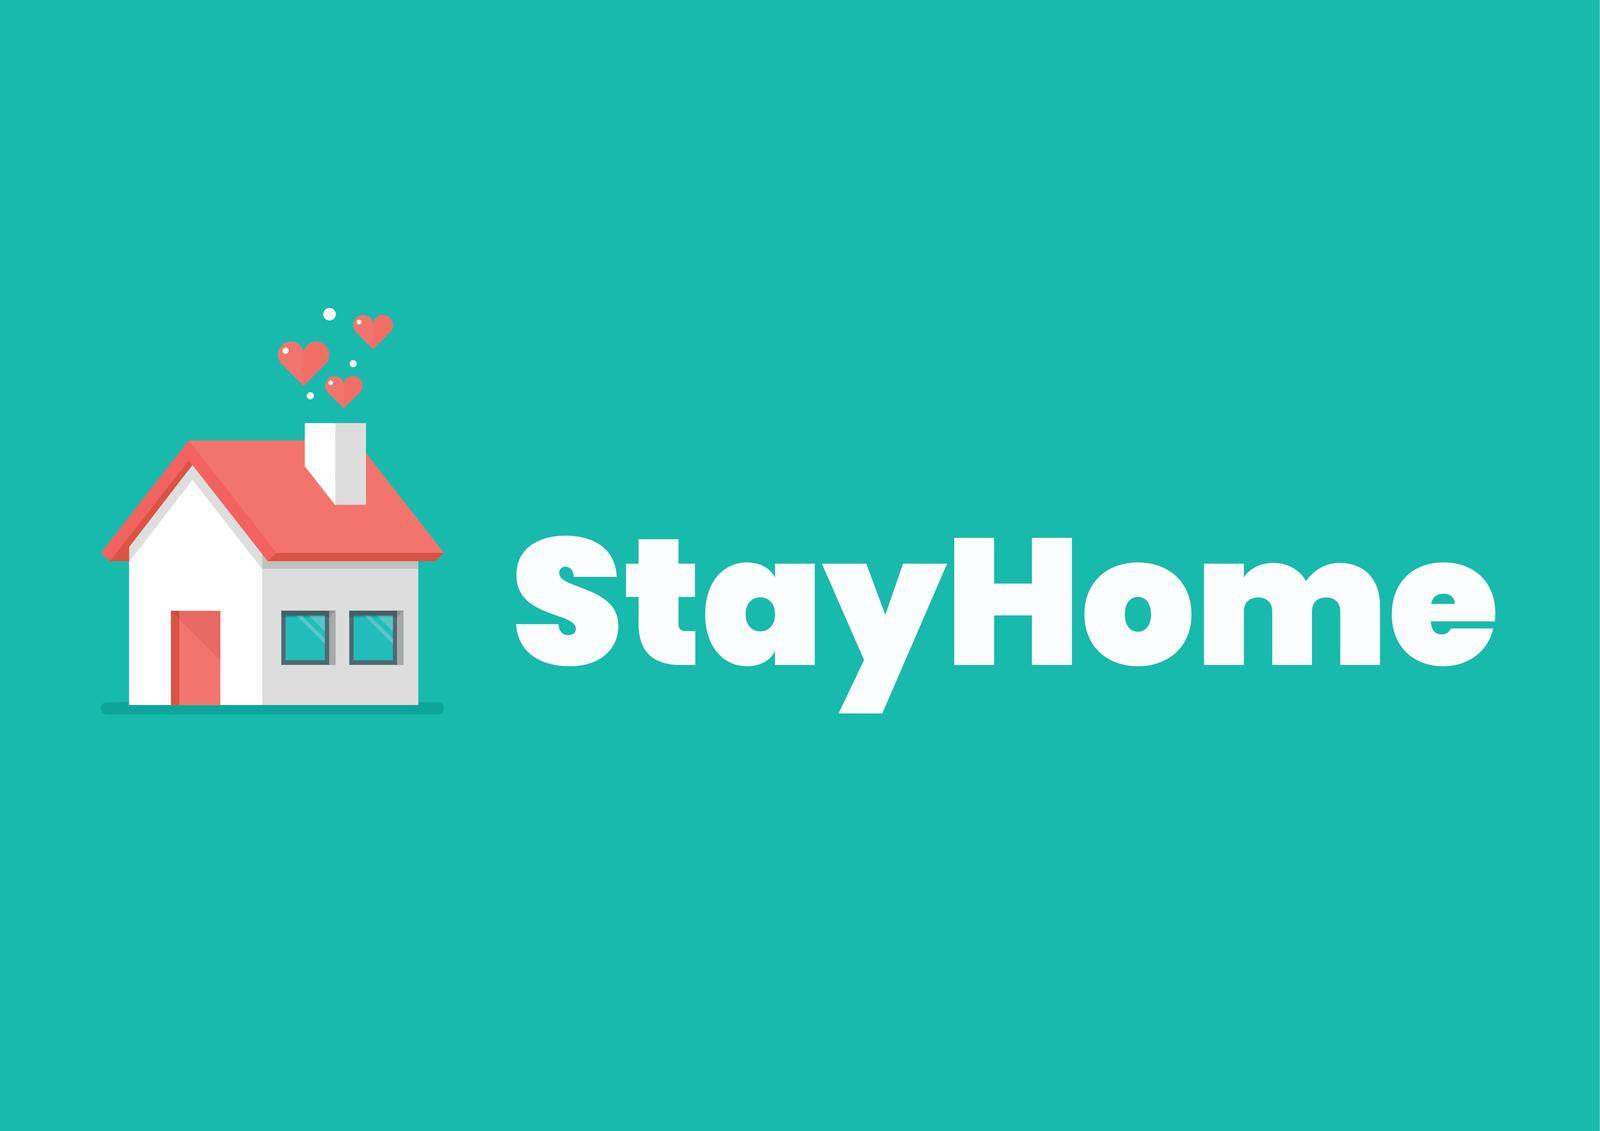 Stay at home slogan with house icon. Vector illustration